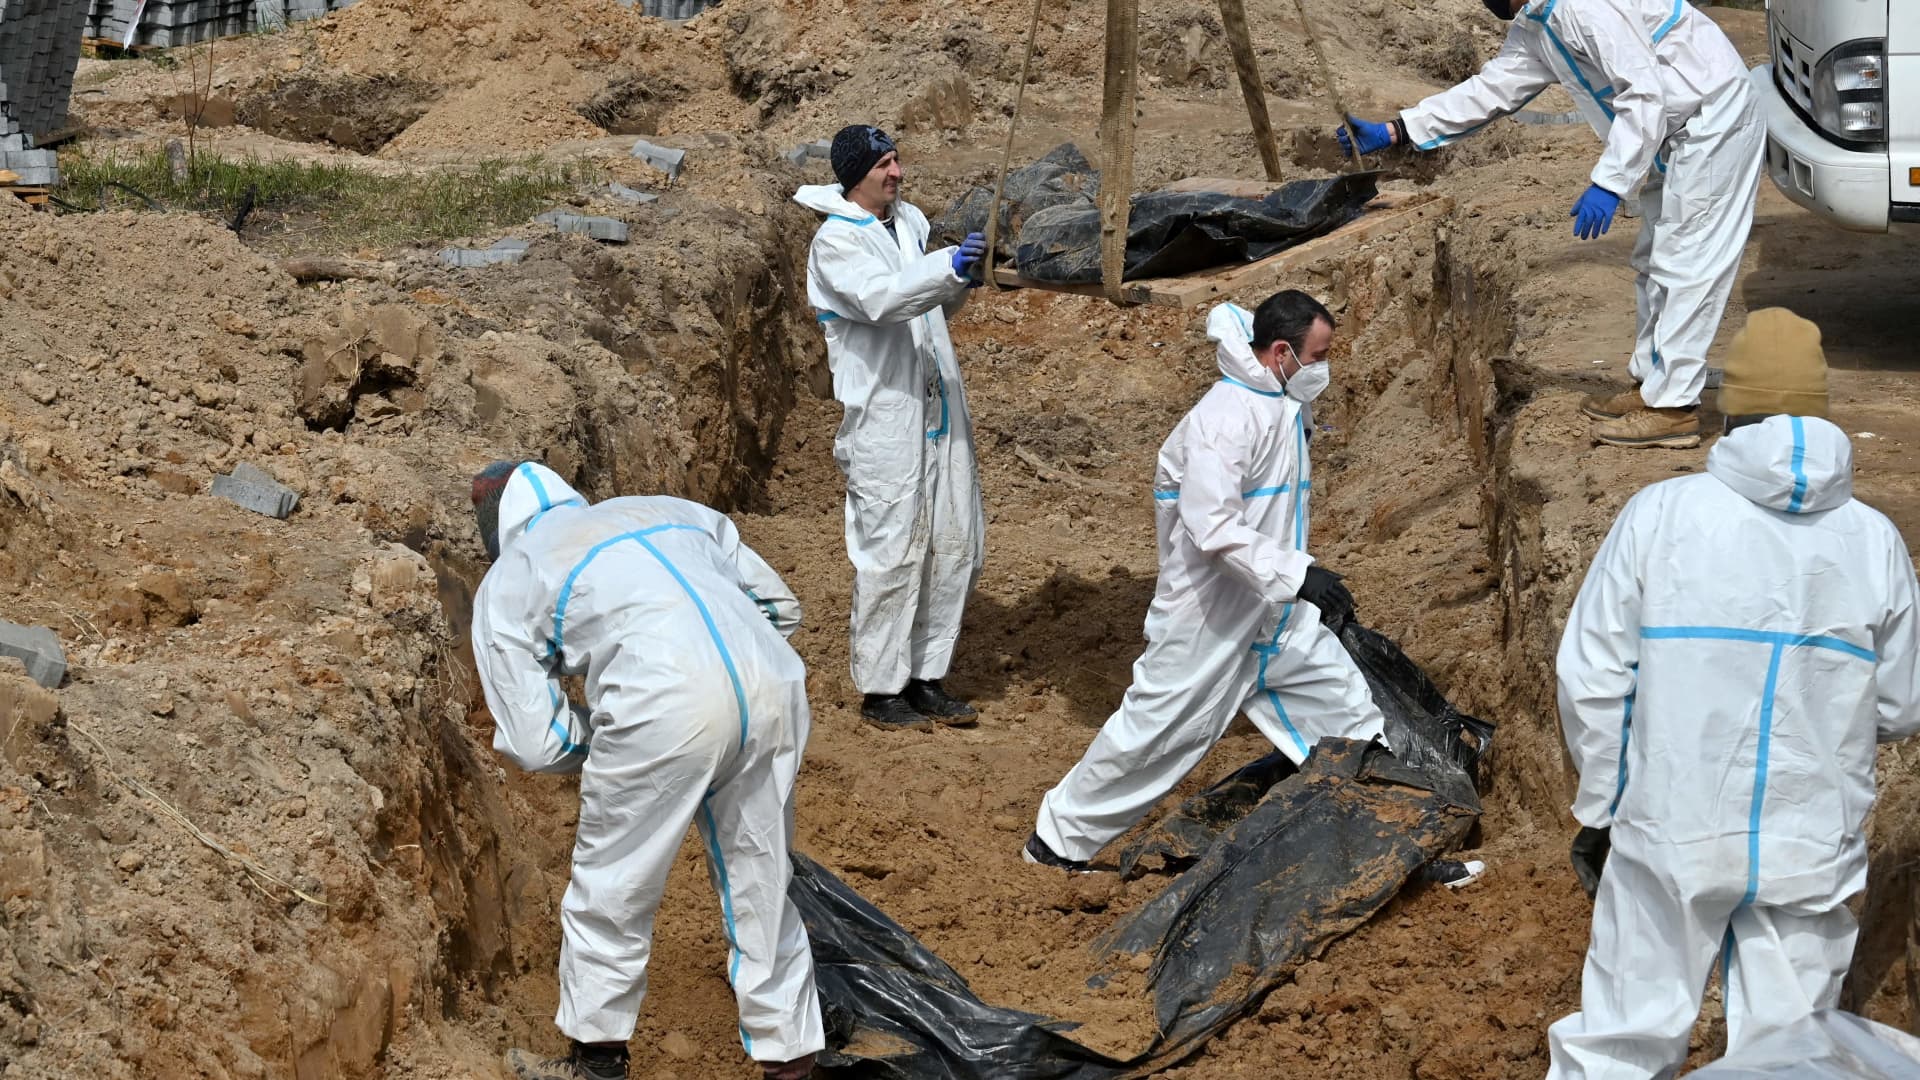 Workers exhume bodies from a mass grave in Bucha, north-west of Kyiv, on April 14, 2022.